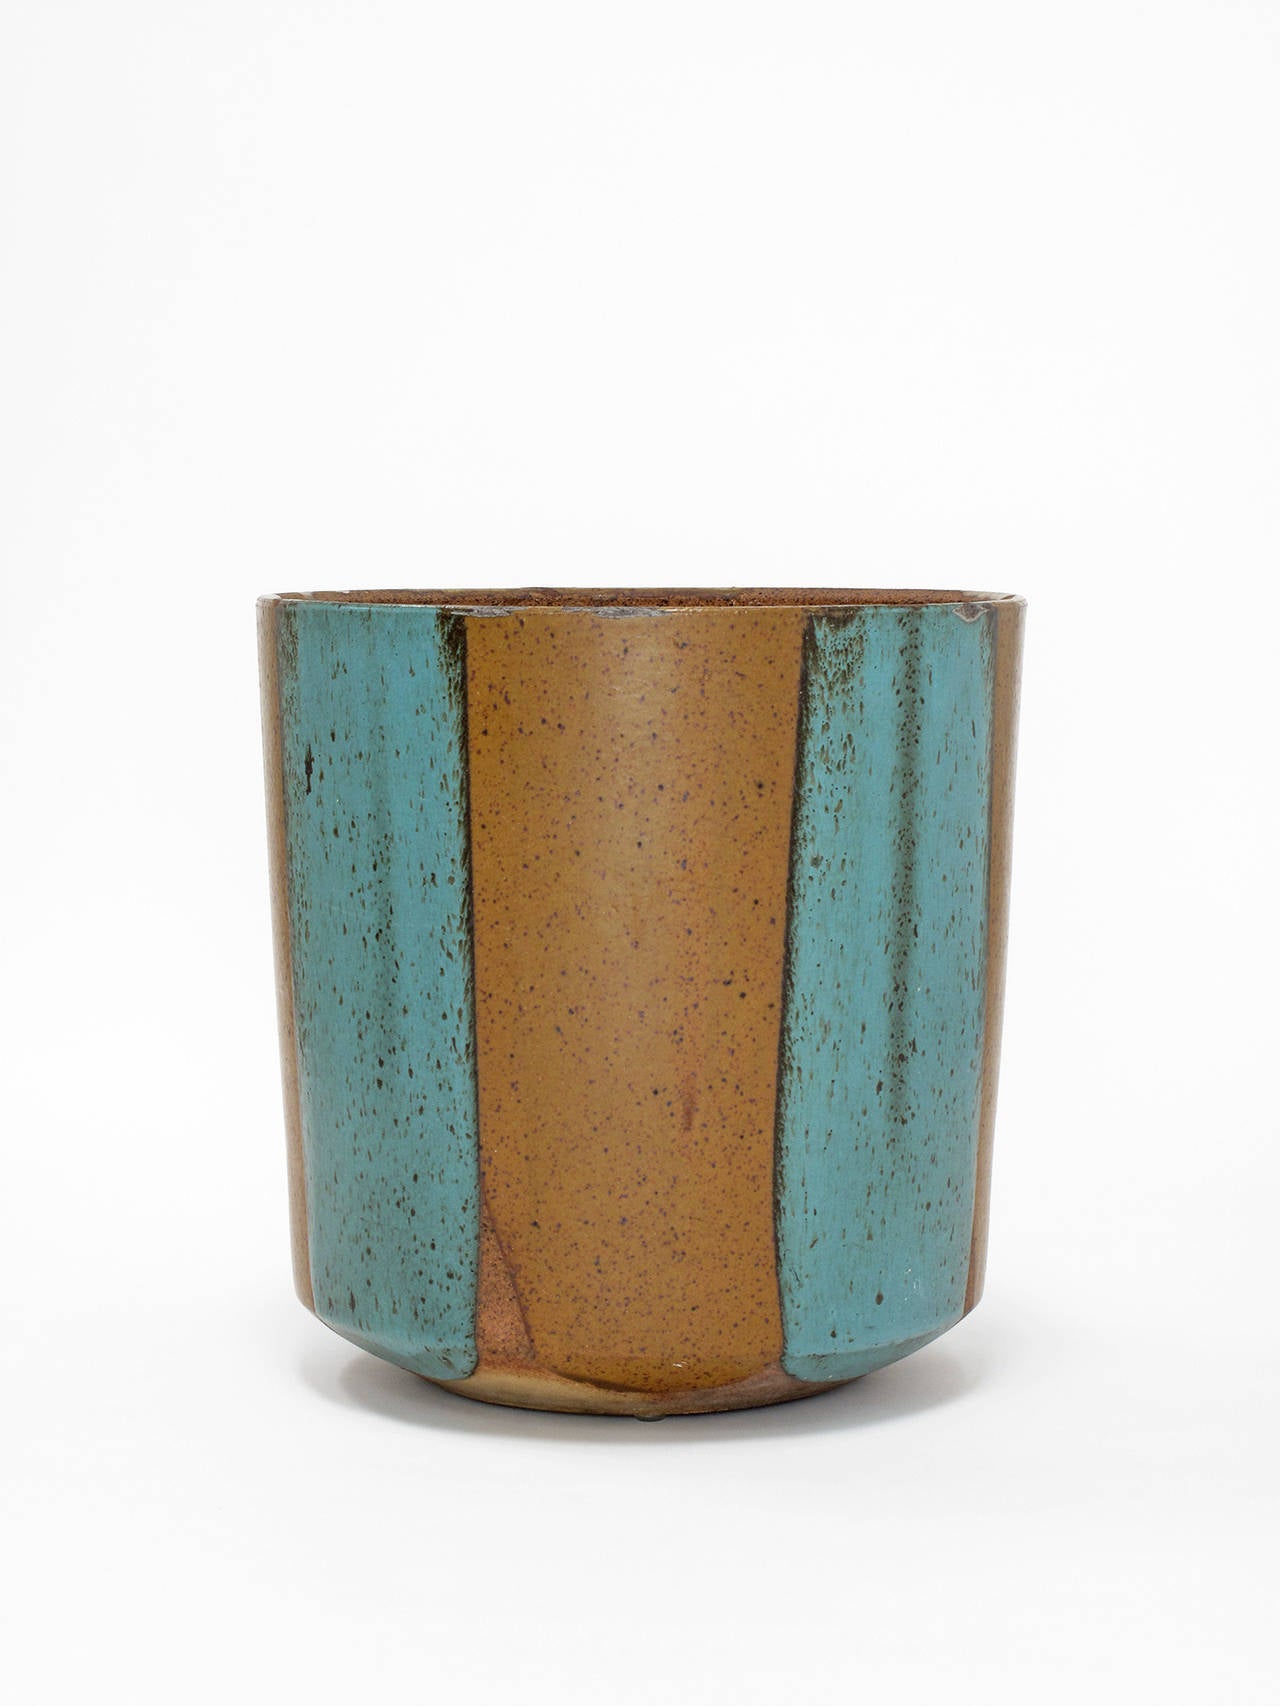 David Cressey
'Flame' design ceramic vessel
Stoneware, glazed stone blue and golden ochre
Pro Artisan collection
Architectural Pottery
Los Angeles, California, 1960s
13.5 high x 13.25 diameter inches